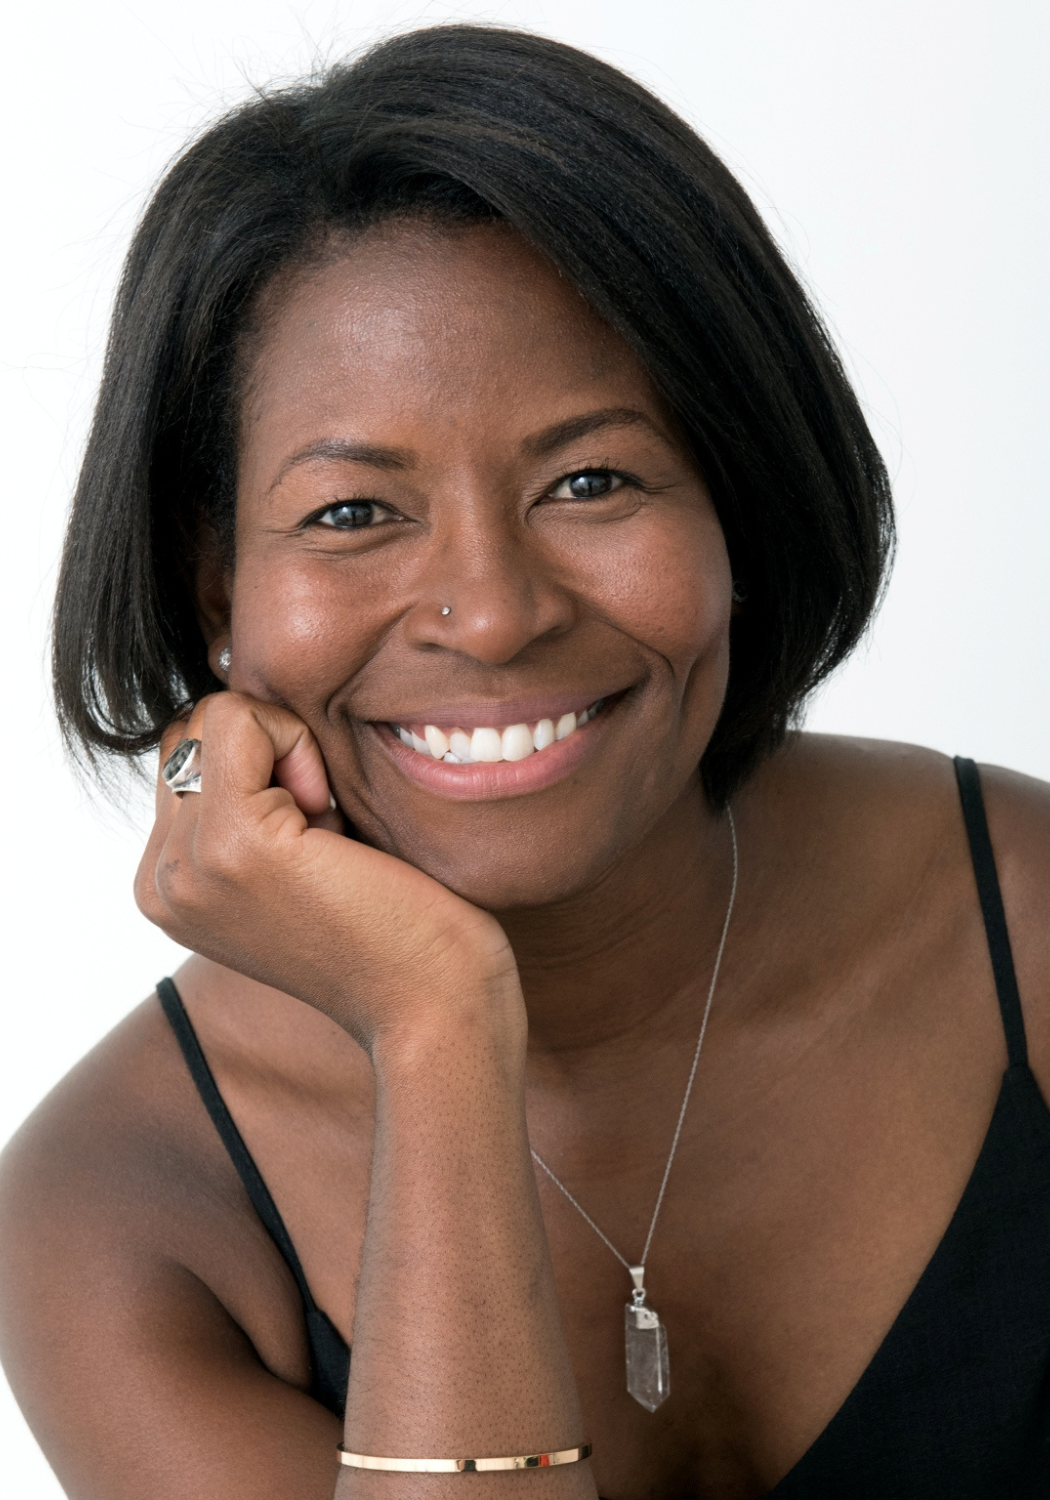 Sarah Kamoto, author of 5 Things You Need To Know About Co-parenting With A High-Conflict Ex